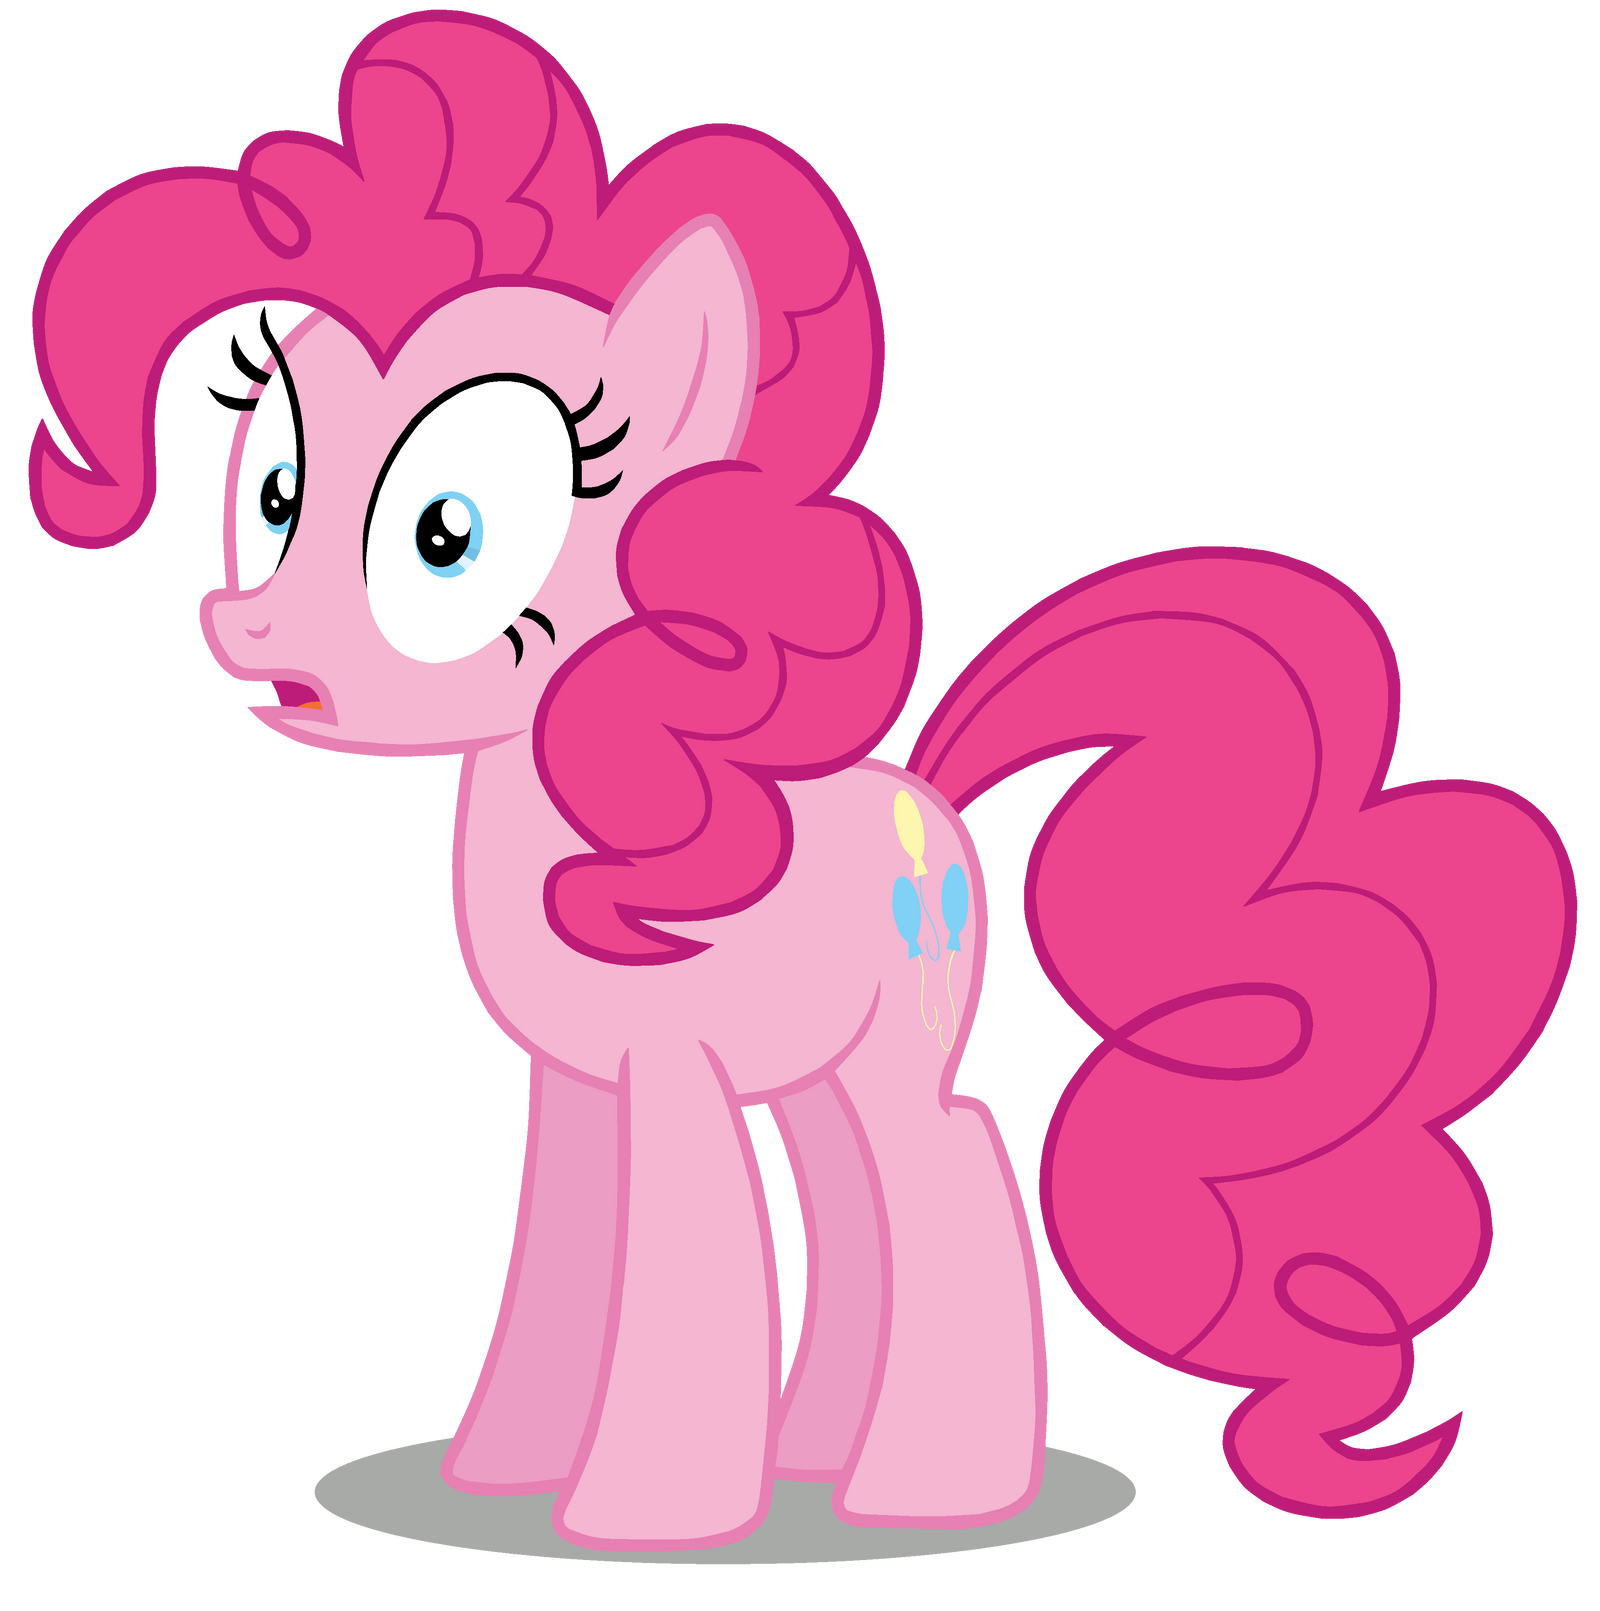 Pinkie Pie (Shocked) #2 by TheHylie on DeviantArt